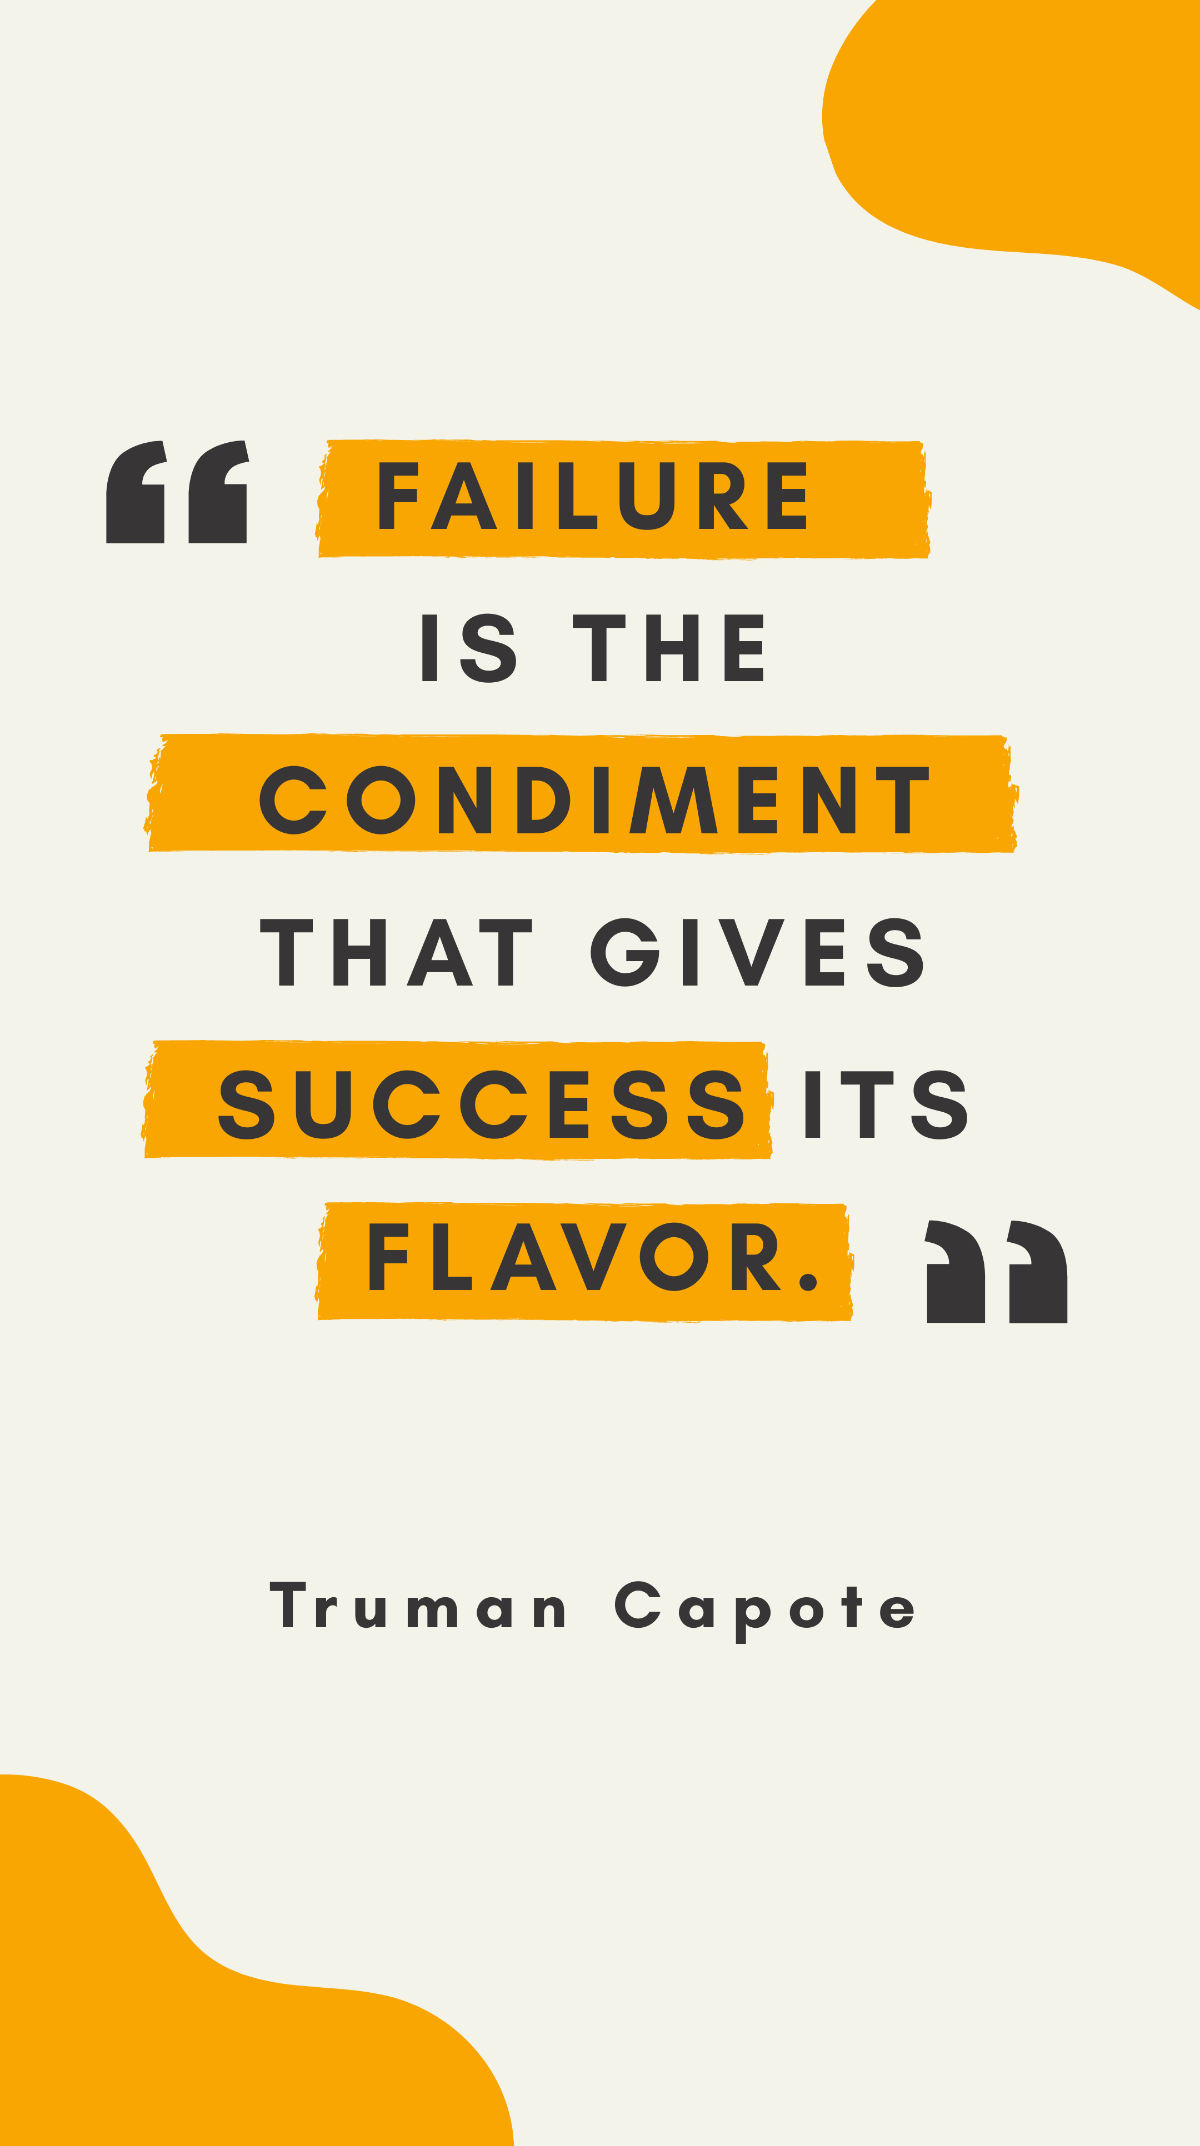 Truman Capote - Failure is the condiment that gives success its flavor. Template